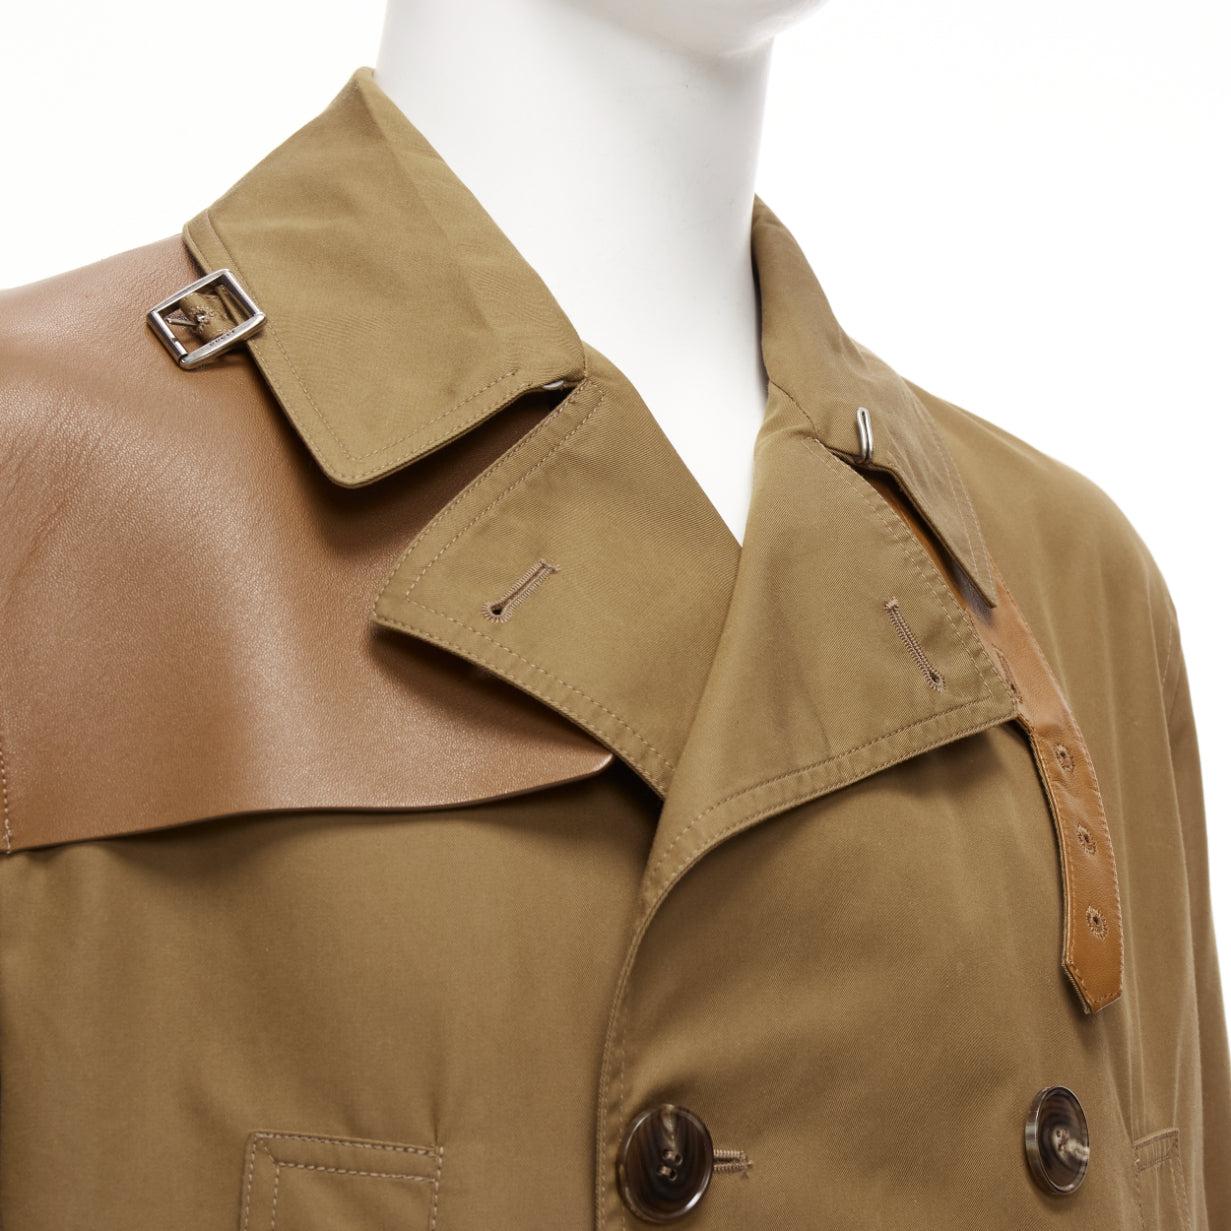 GUCCI Vintage brown leather trimmed cotton wool blend lined trench coat IT48 M
Reference: JSLE/A00101
Brand: Gucci
Material: Leather, Cotton, Blend
Color: Brown
Pattern: Solid
Closure: Button
Lining: Grey Fabric
Extra Details: Brown leather trimmed.